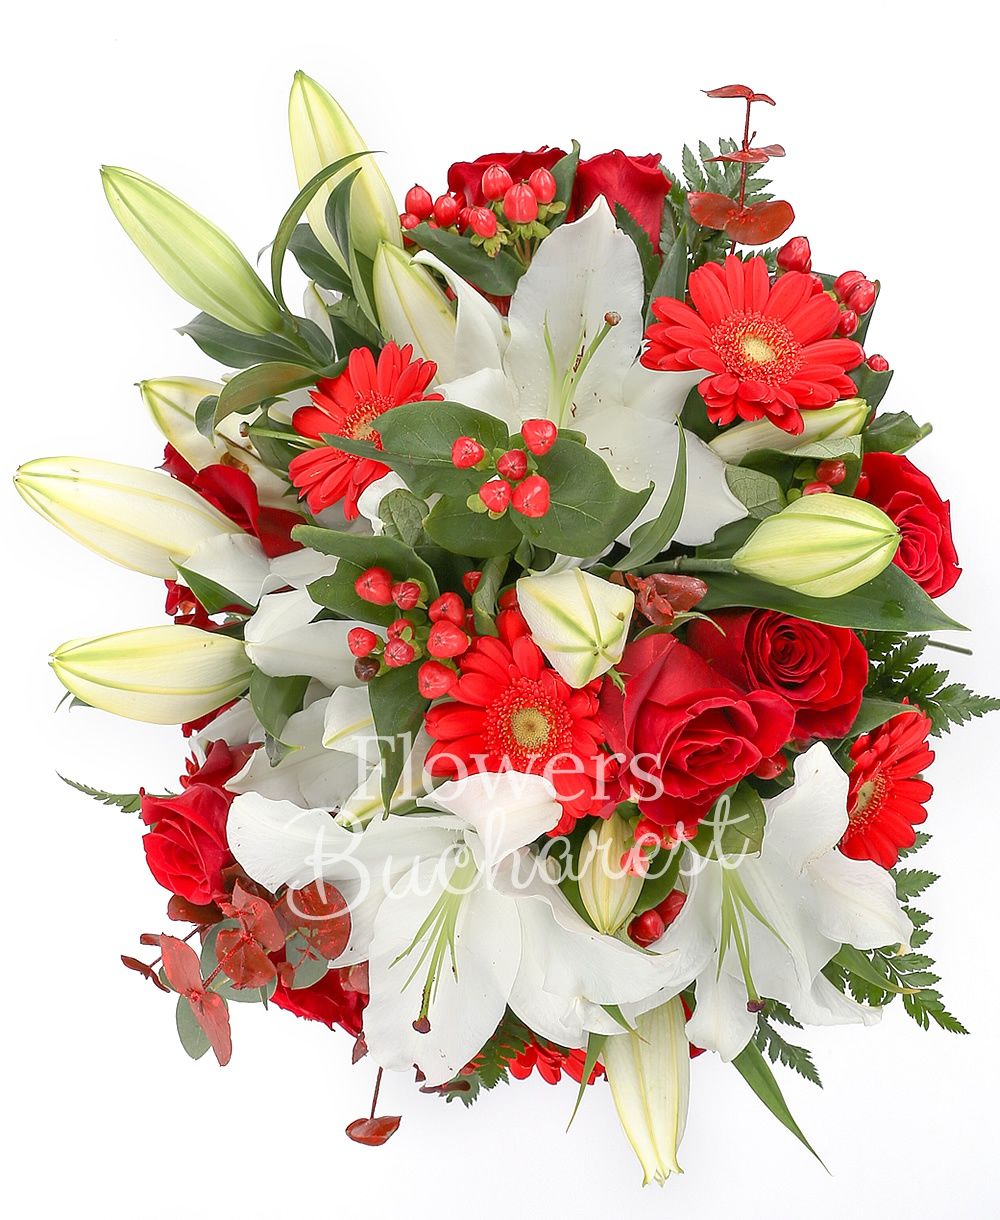 3 white lilies, 9 red roses, 6 red gerbera, 5 red hypericum, greenery